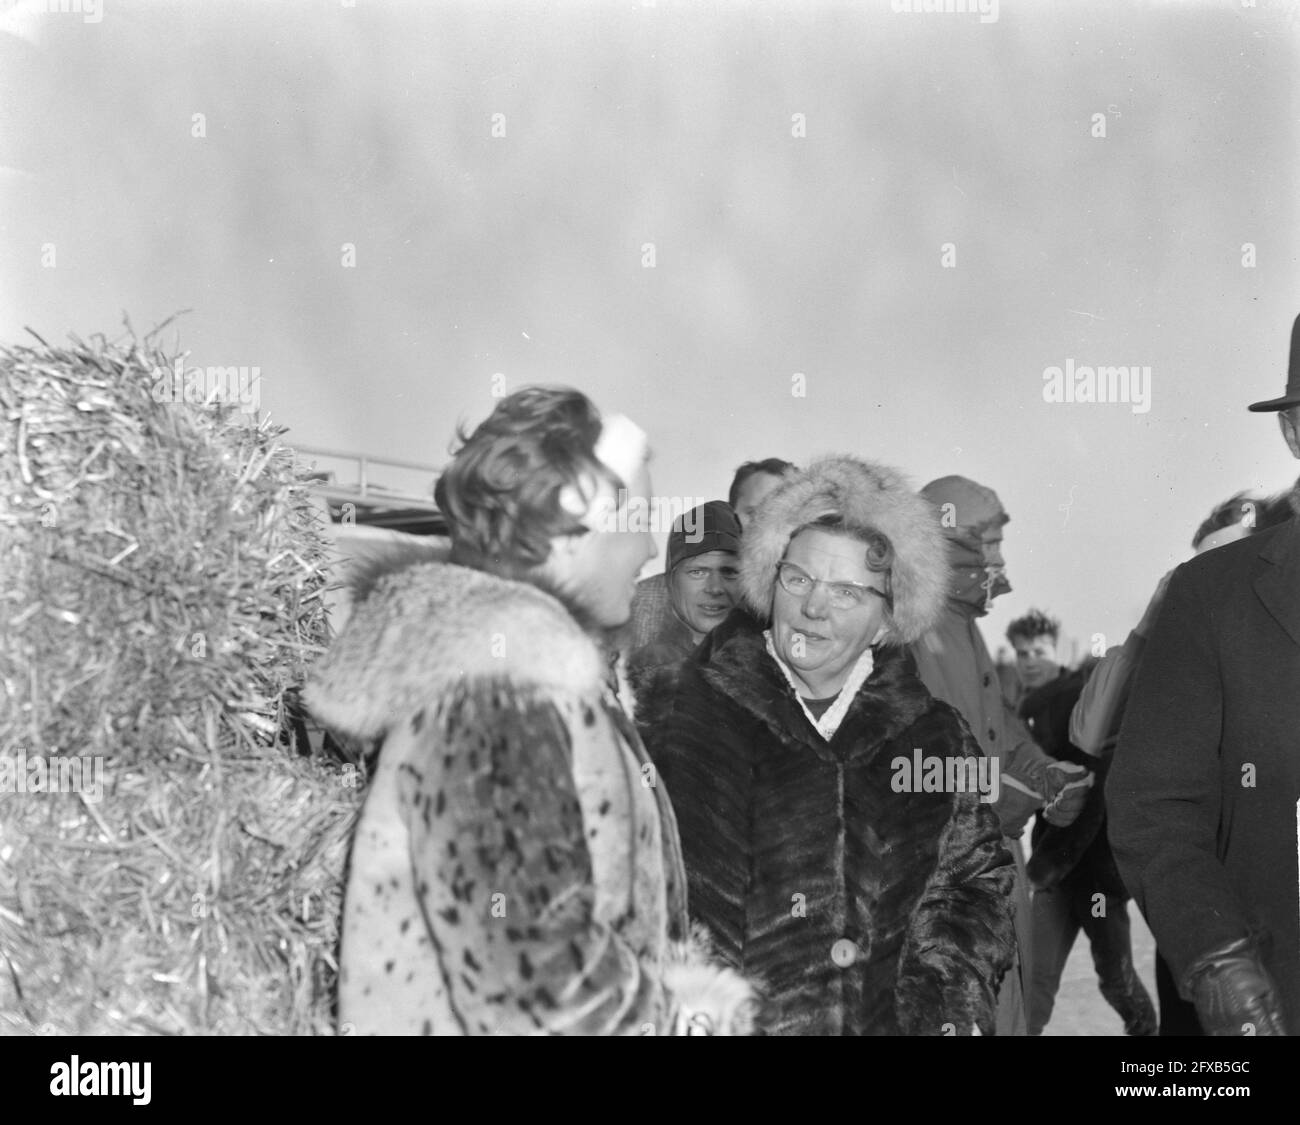 Elfstedentocht 1963. Queen Juliana and Princess Beatrix at the finish in Leeuwarden, January 18, 1963, royal family, skating, sports, spectators, The Netherlands, 20th century press agency photo, news to remember, documentary, historic photography 1945-1990, visual stories, human history of the Twentieth Century, capturing moments in time Stock Photo